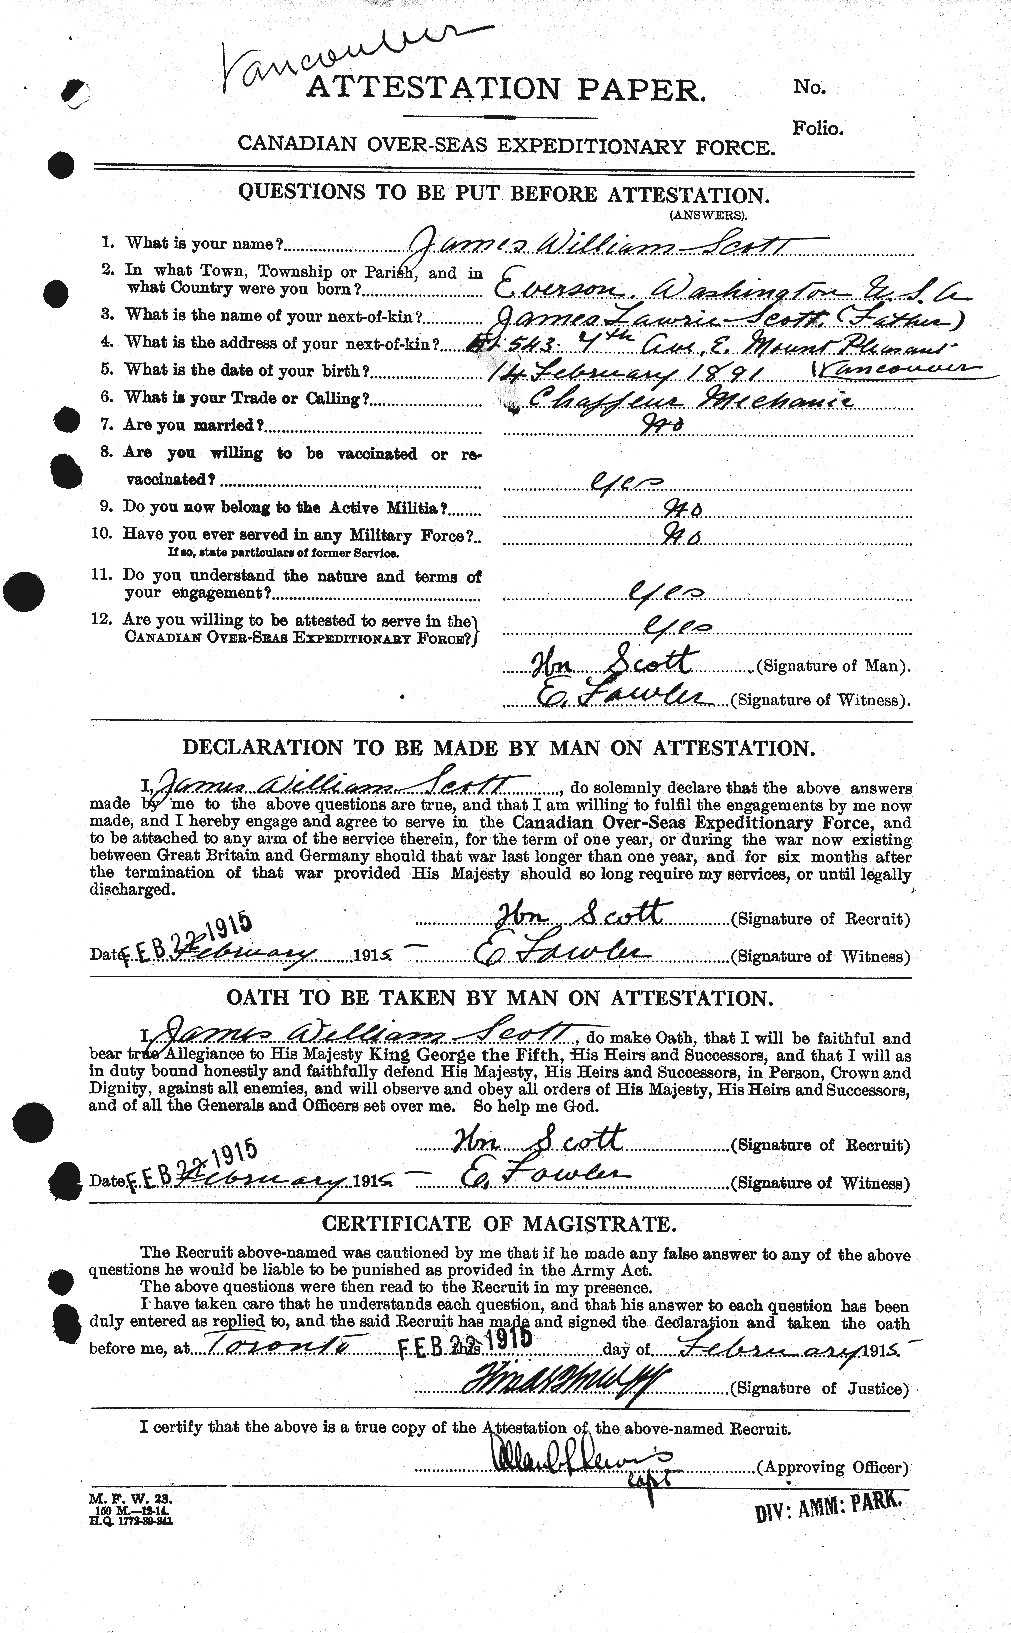 Personnel Records of the First World War - CEF 085168a